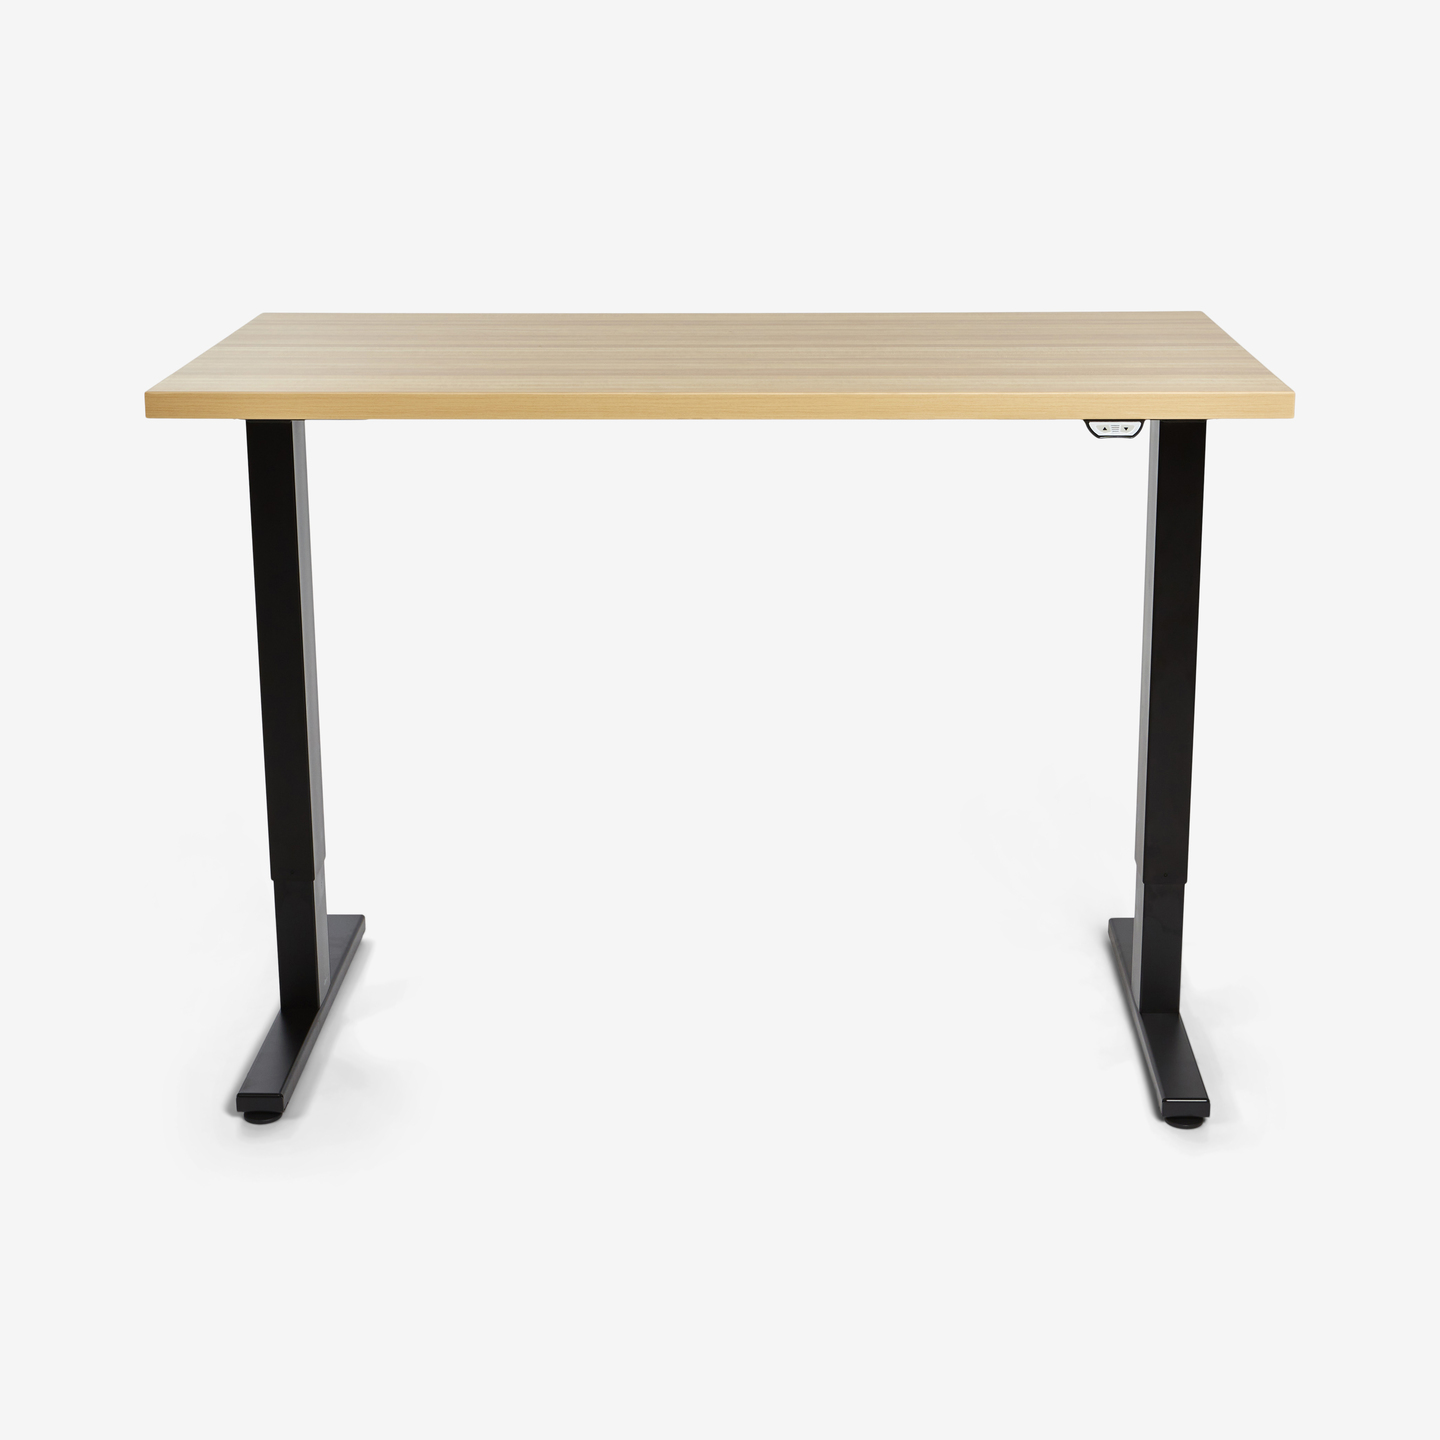 1091_Ryze-Sit-Stand-Desk-Maple-Top-Black-Base_Front-Sitting_2021